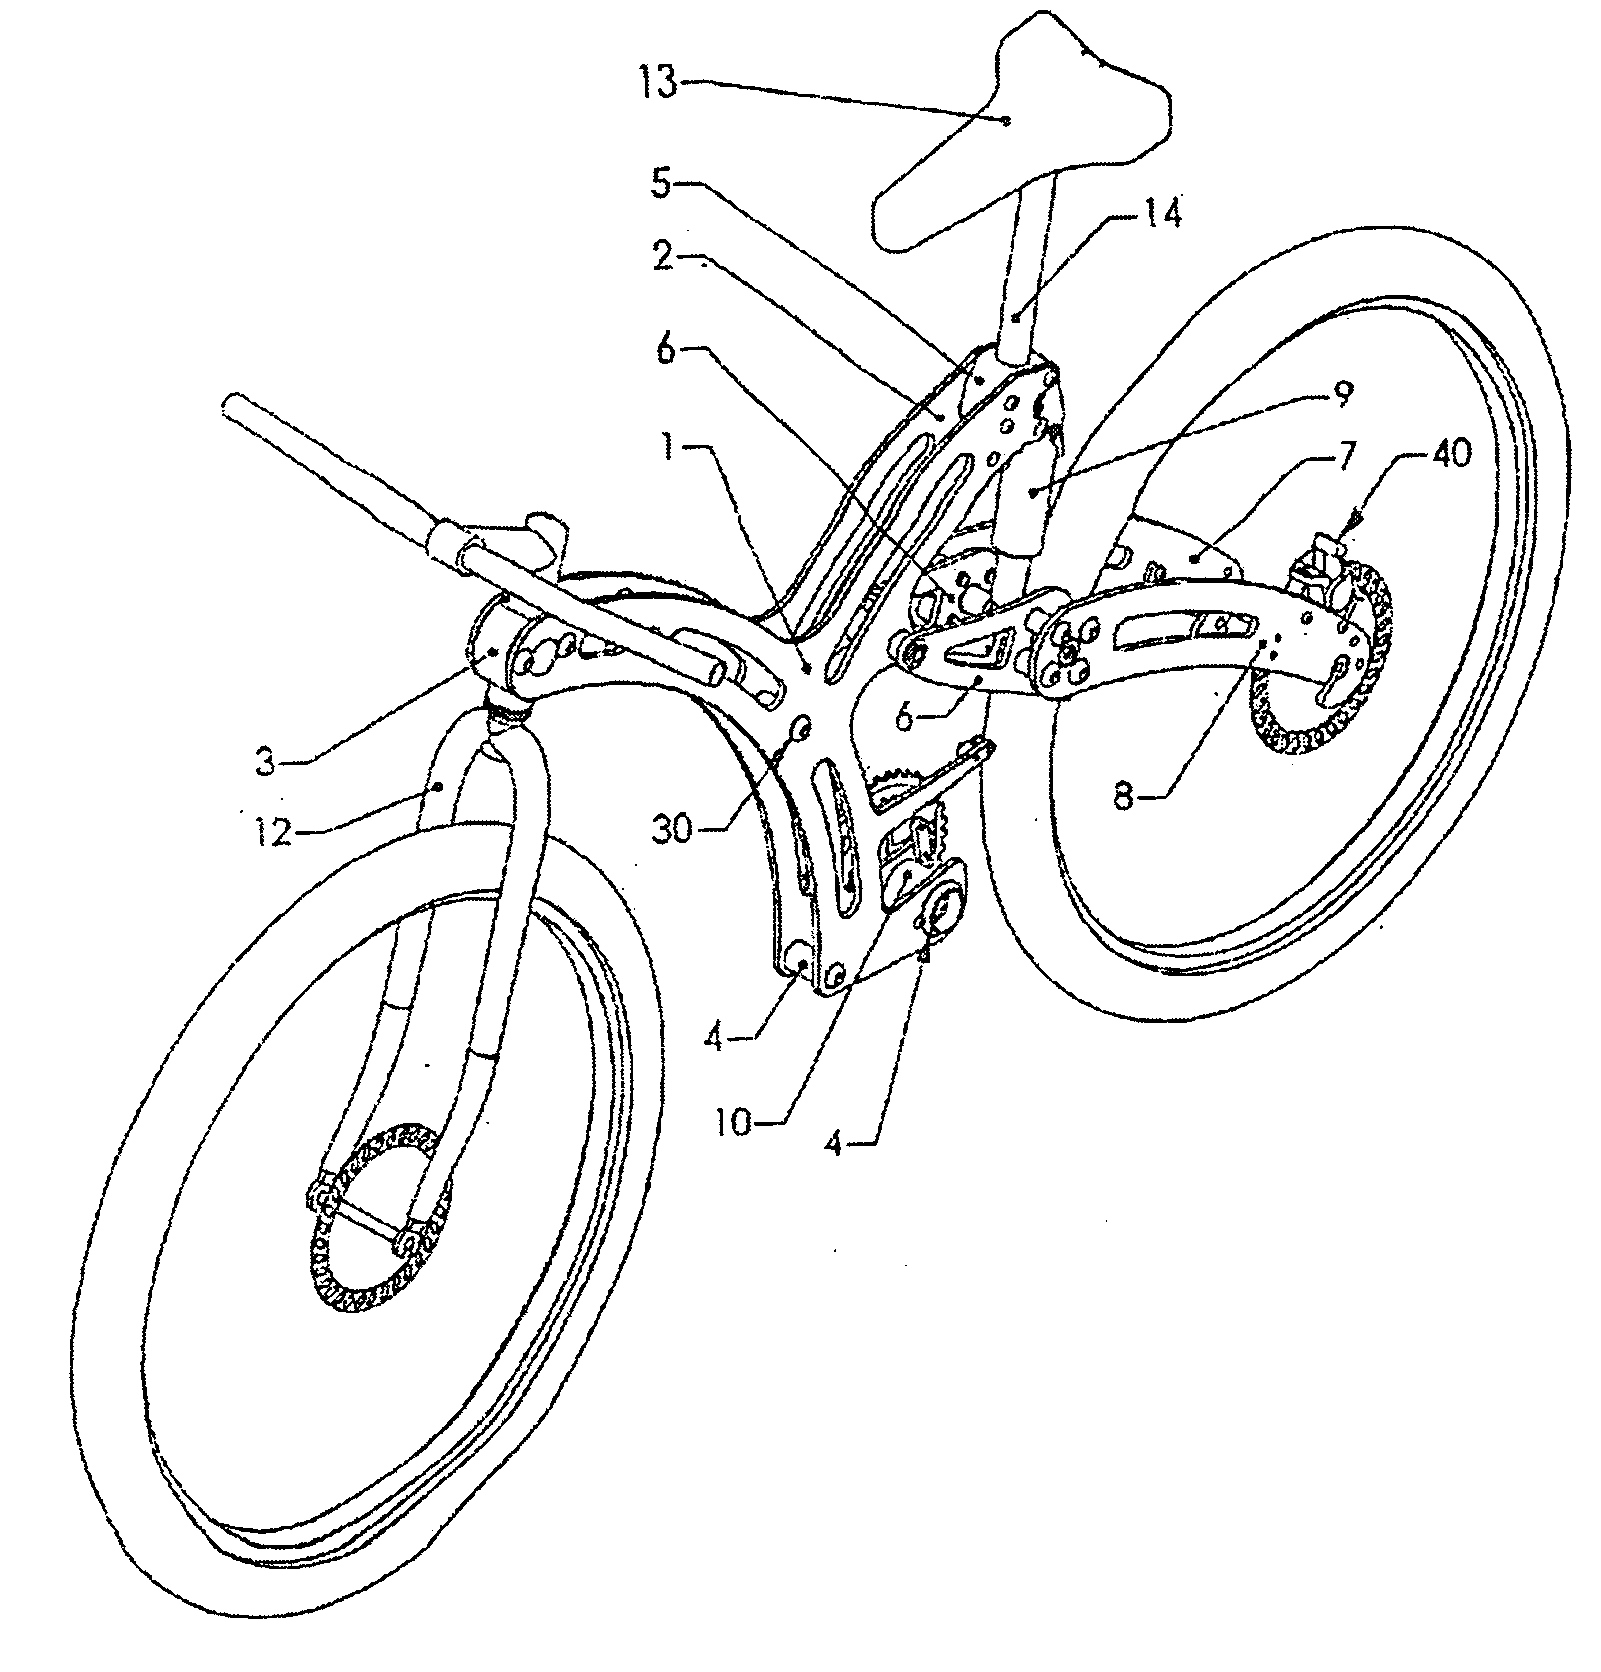 Folding Bicycle Constructed from Plate Frame Elements